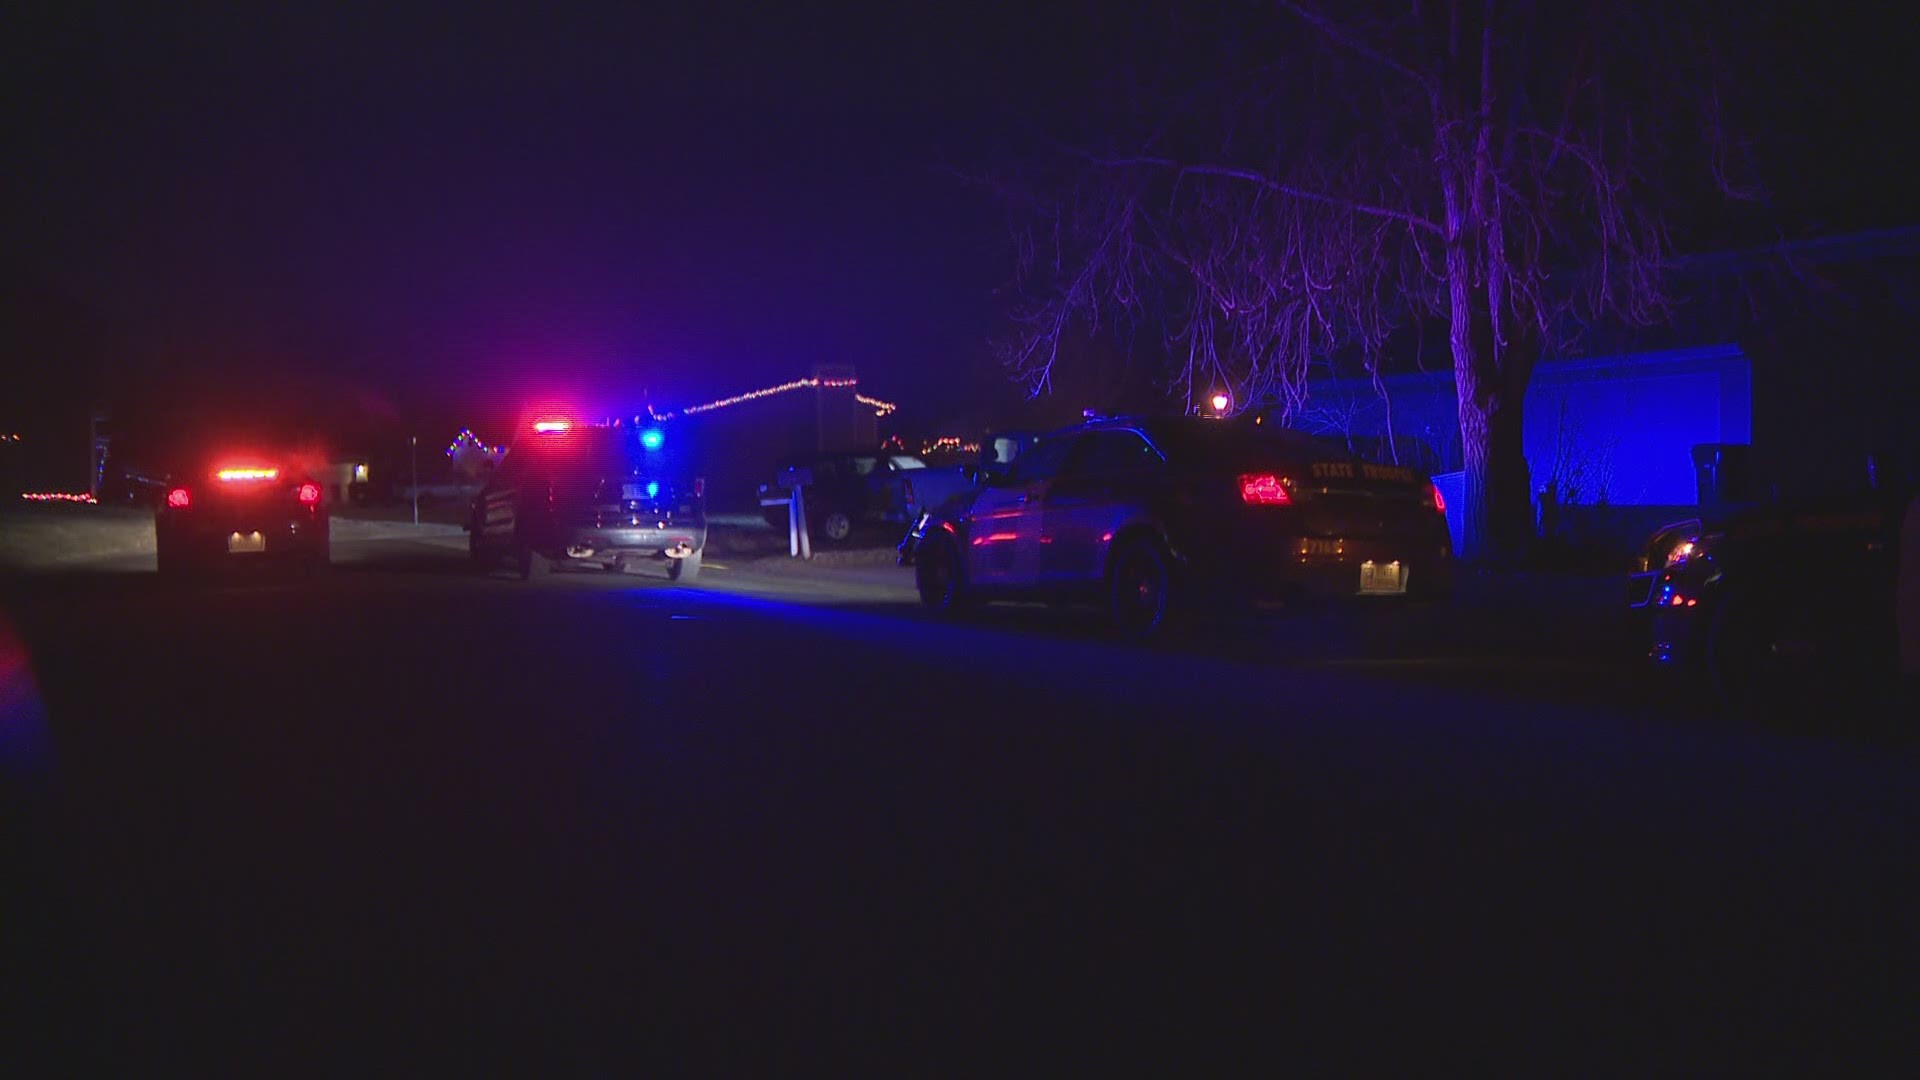 One man is dead and another hospitalized after a fatal crash in Eagan Tuesday that police say appears to involve alcohol.